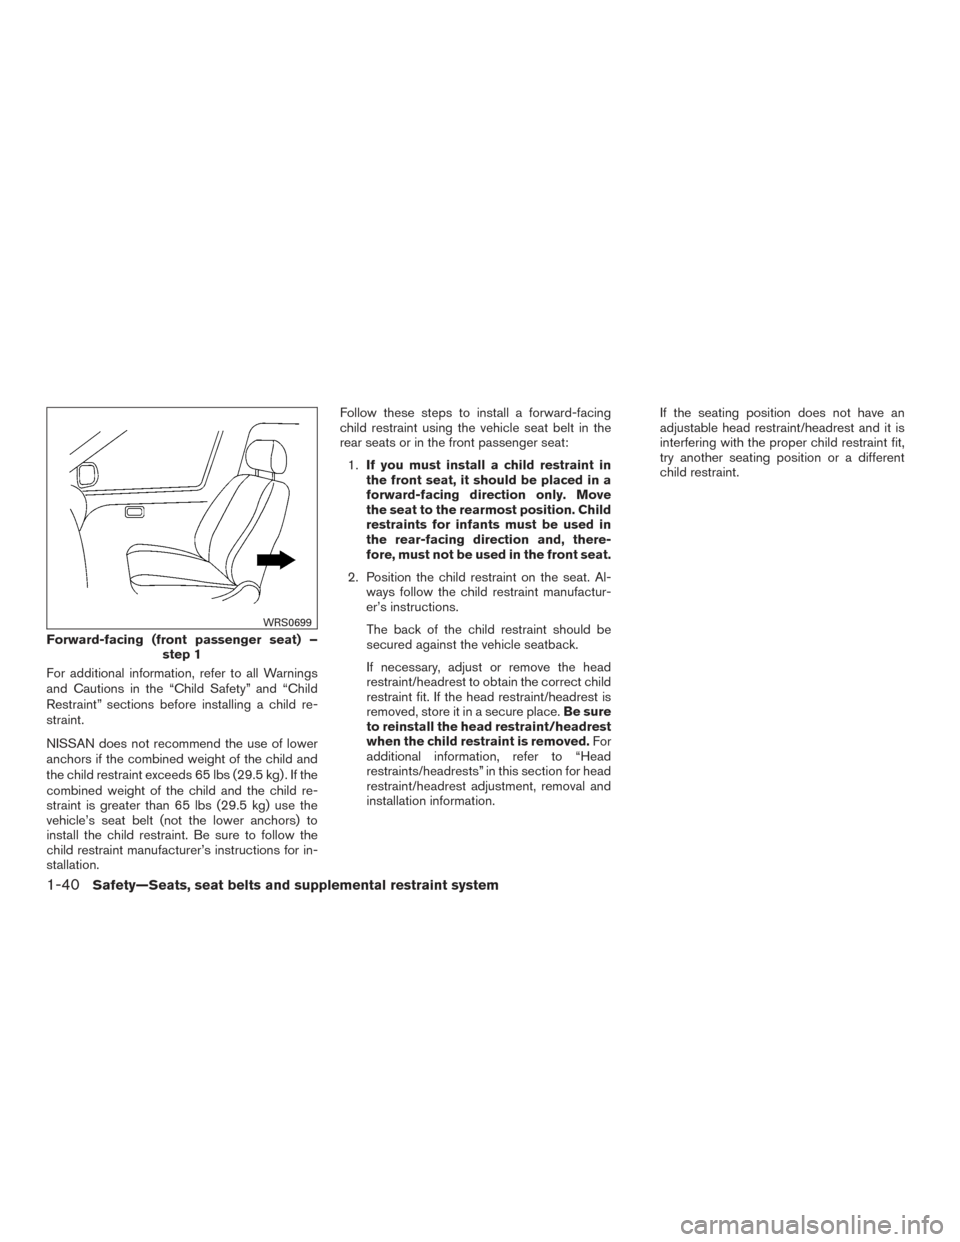 NISSAN XTERRA 2015 N50 / 2.G Service Manual For additional information, refer to all Warnings
and Cautions in the “Child Safety” and “Child
Restraint” sections before installing a child re-
straint.
NISSAN does not recommend the use of 